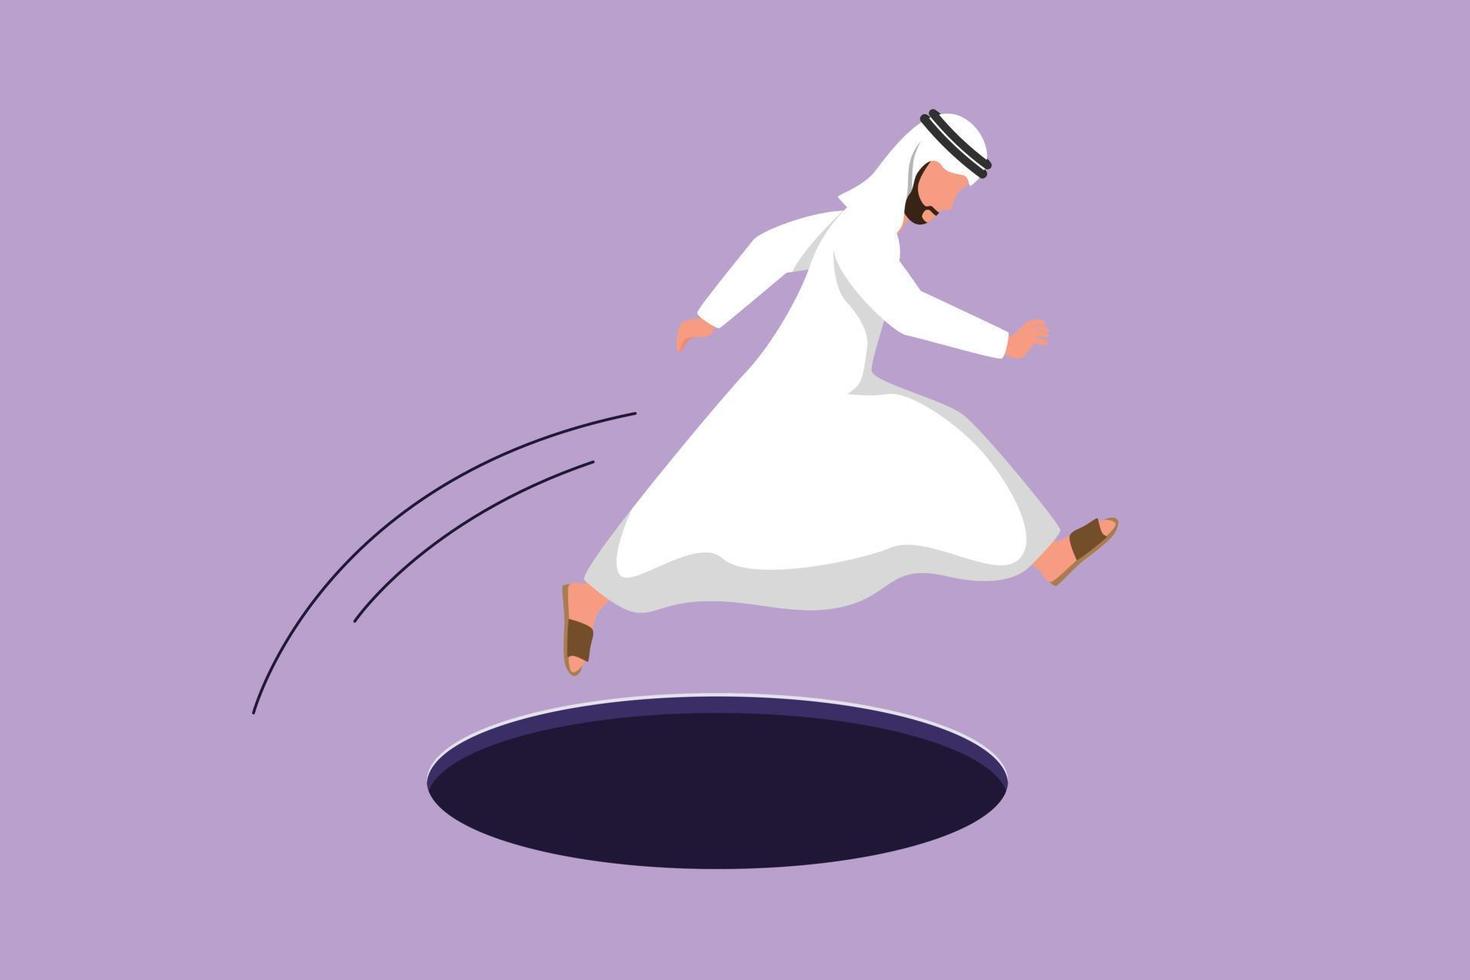 Graphic flat design drawing Arabian businessman jumping through hole, metaphor to facing big problem. Business struggles in market competition. Strength for success. Cartoon style vector illustration